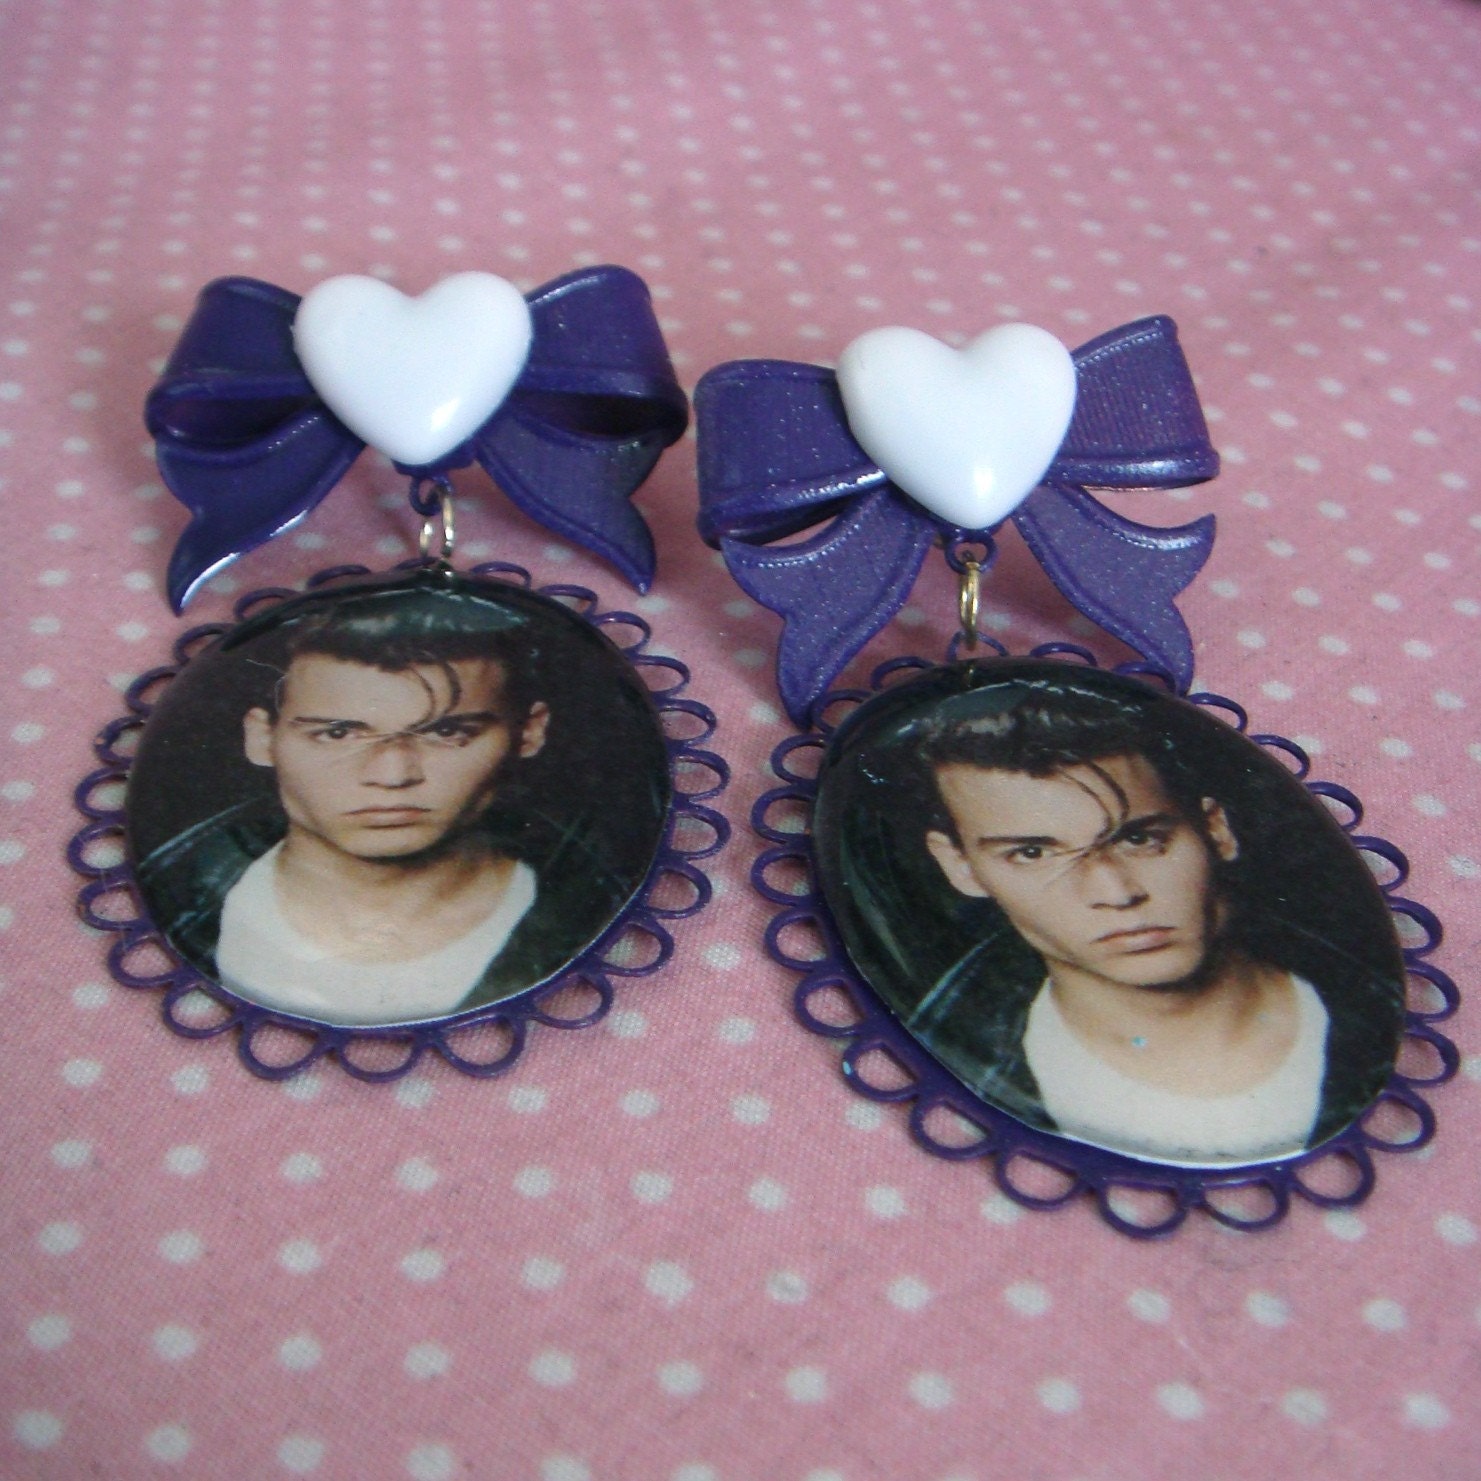 johnny depp earrings. johnny depp earrings. Johnny Depp Cameo Earrings. From imyourpresent